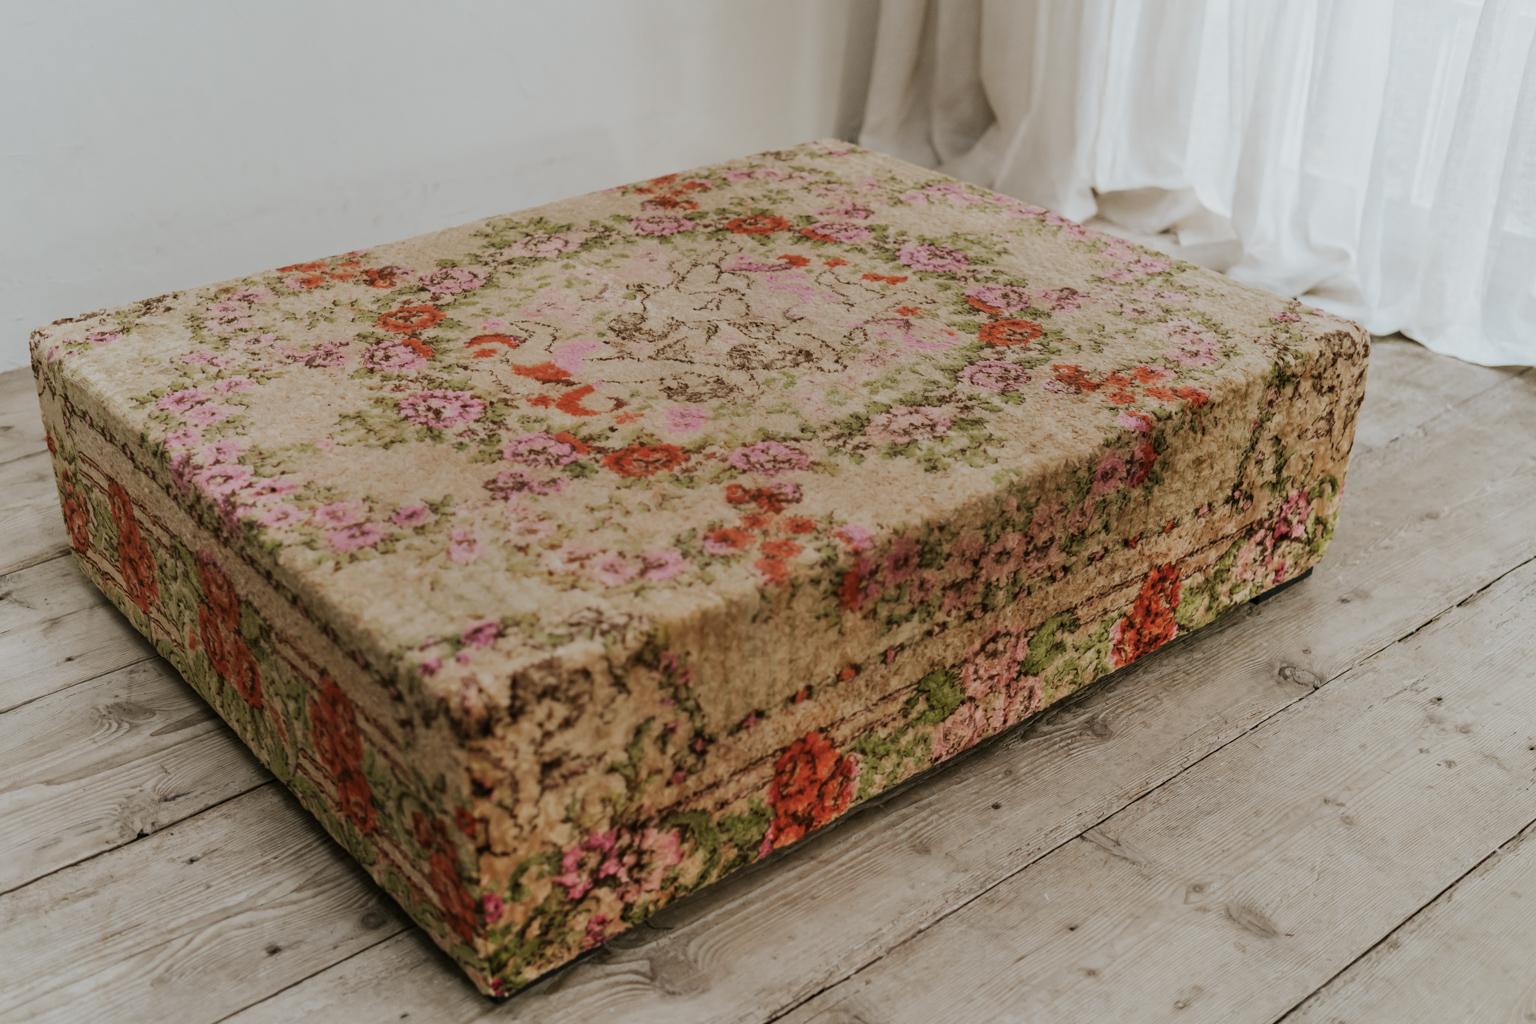 This ottoman/pouf was made in our workshop with old velvet fabric from the 1950s.